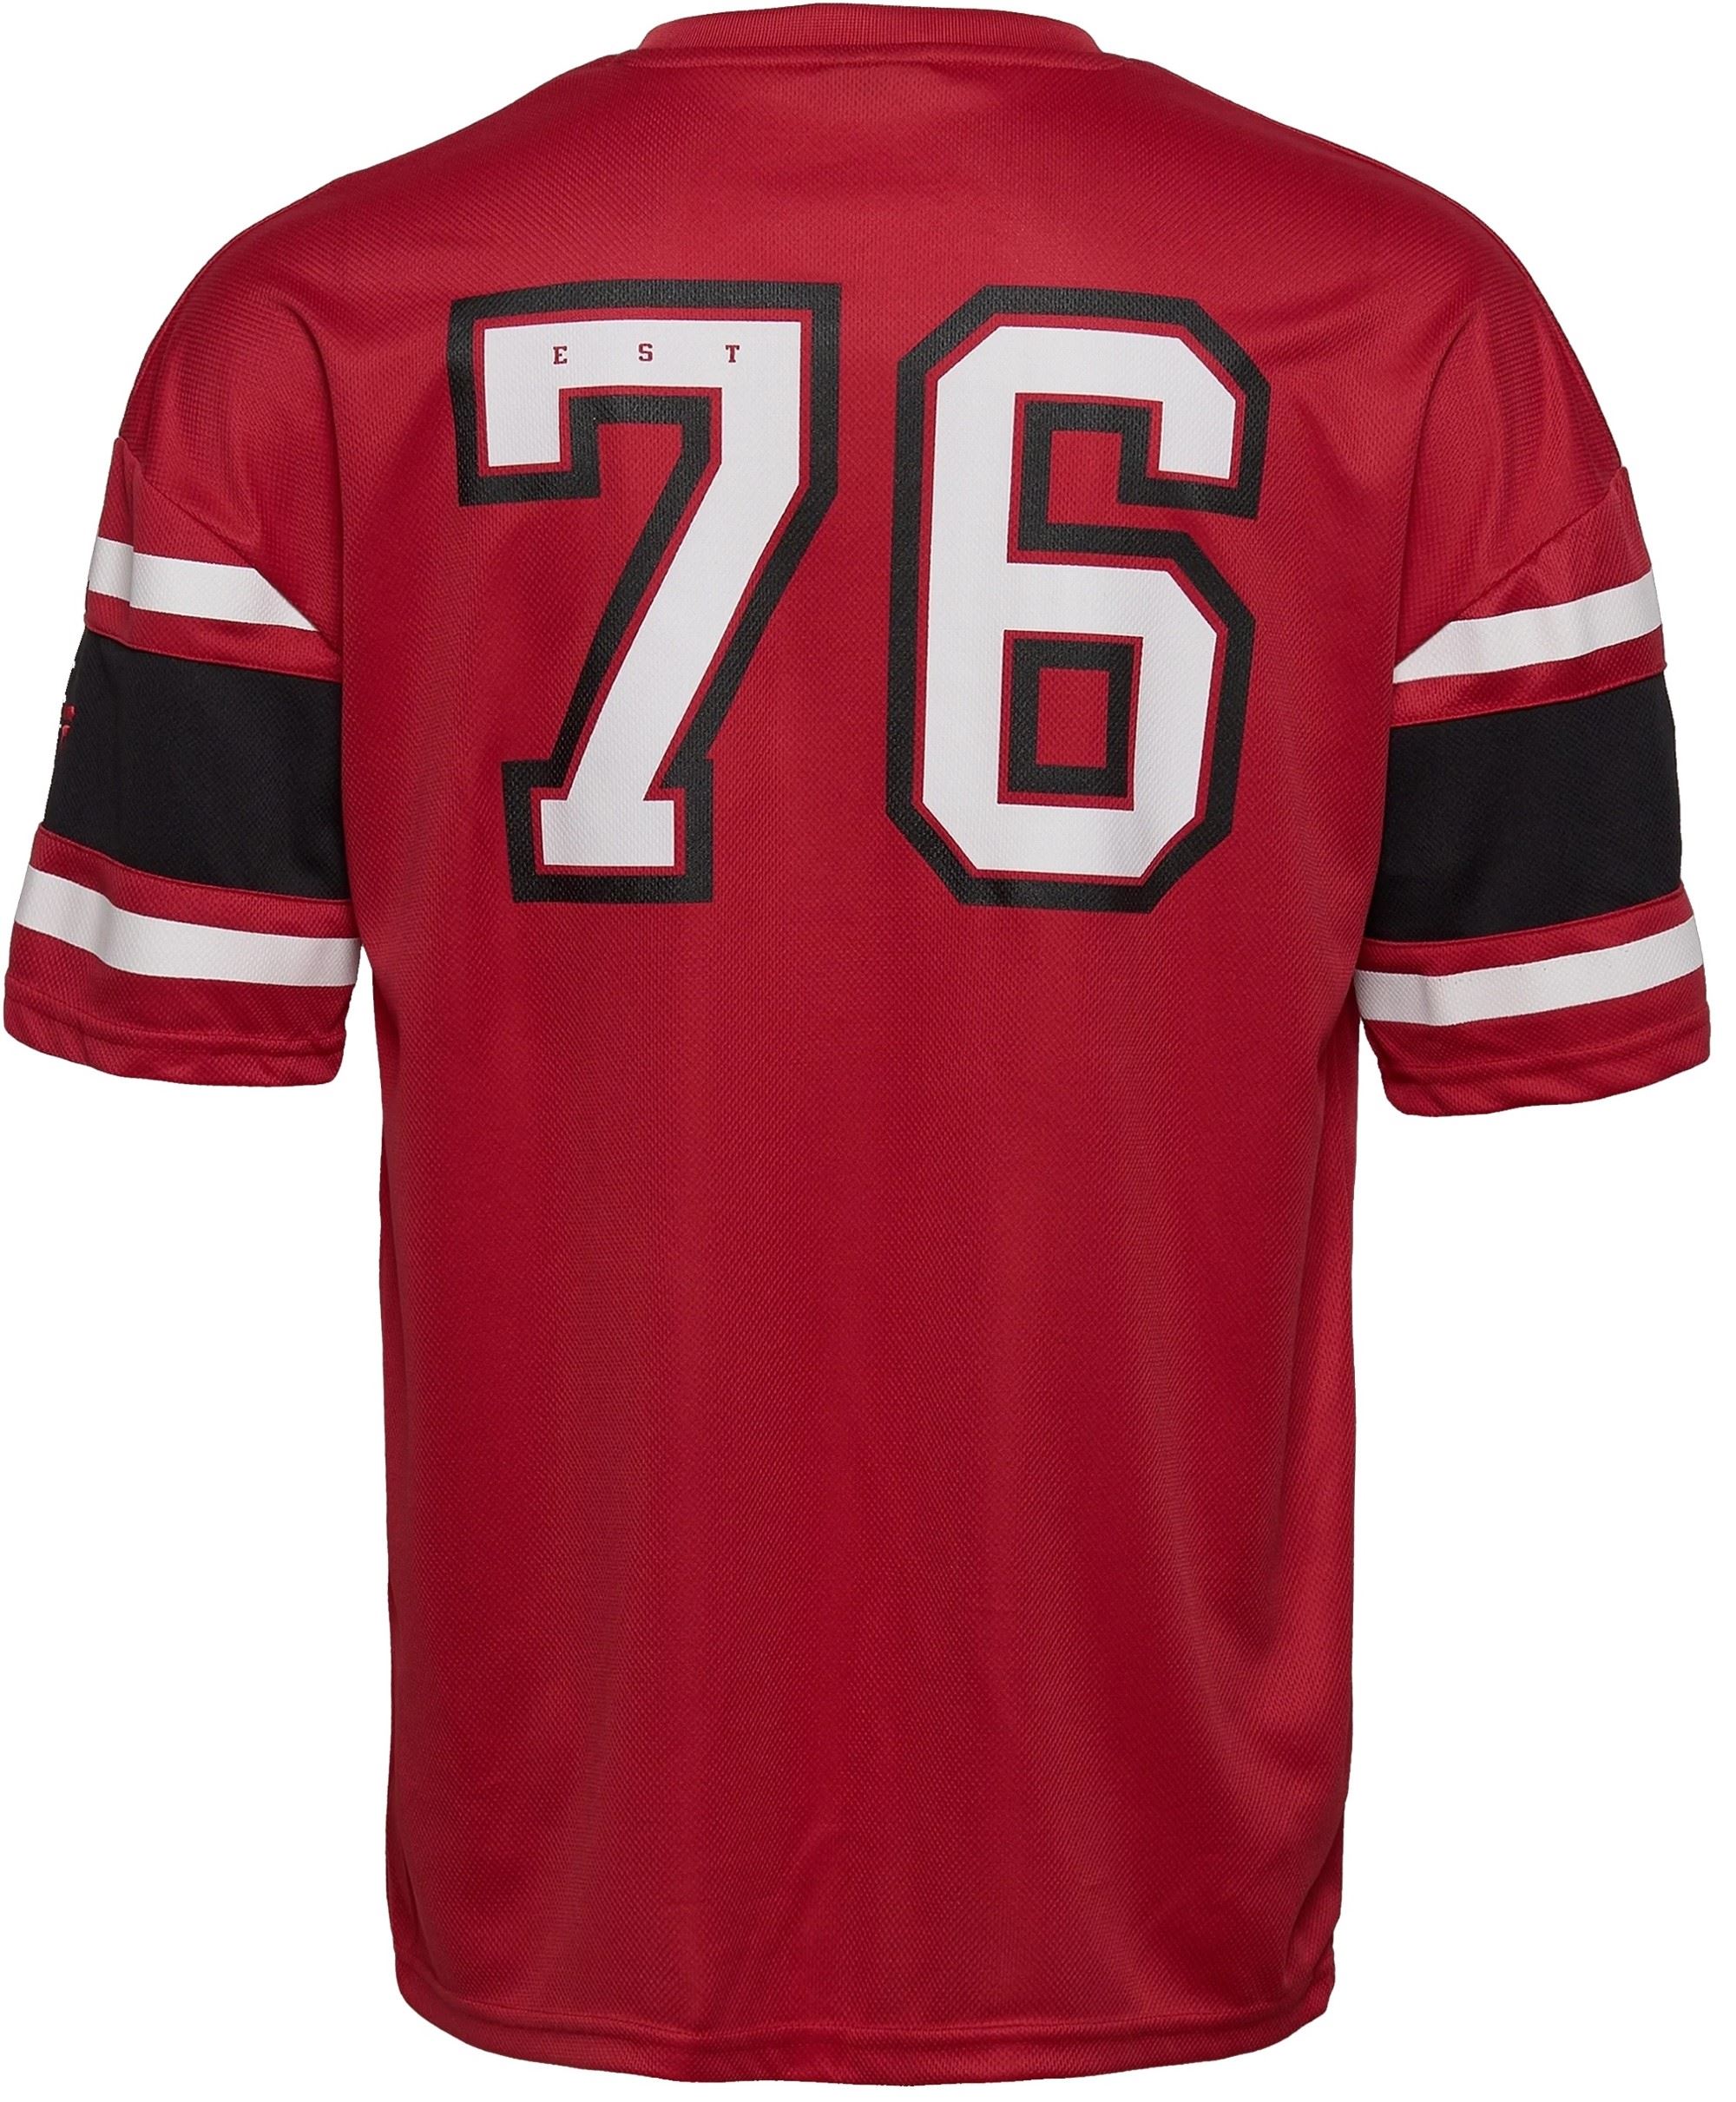 Tampa Bay Buccaneers NFL Team Value Franchise Poly Mesh Supporters Jersey Fanatics